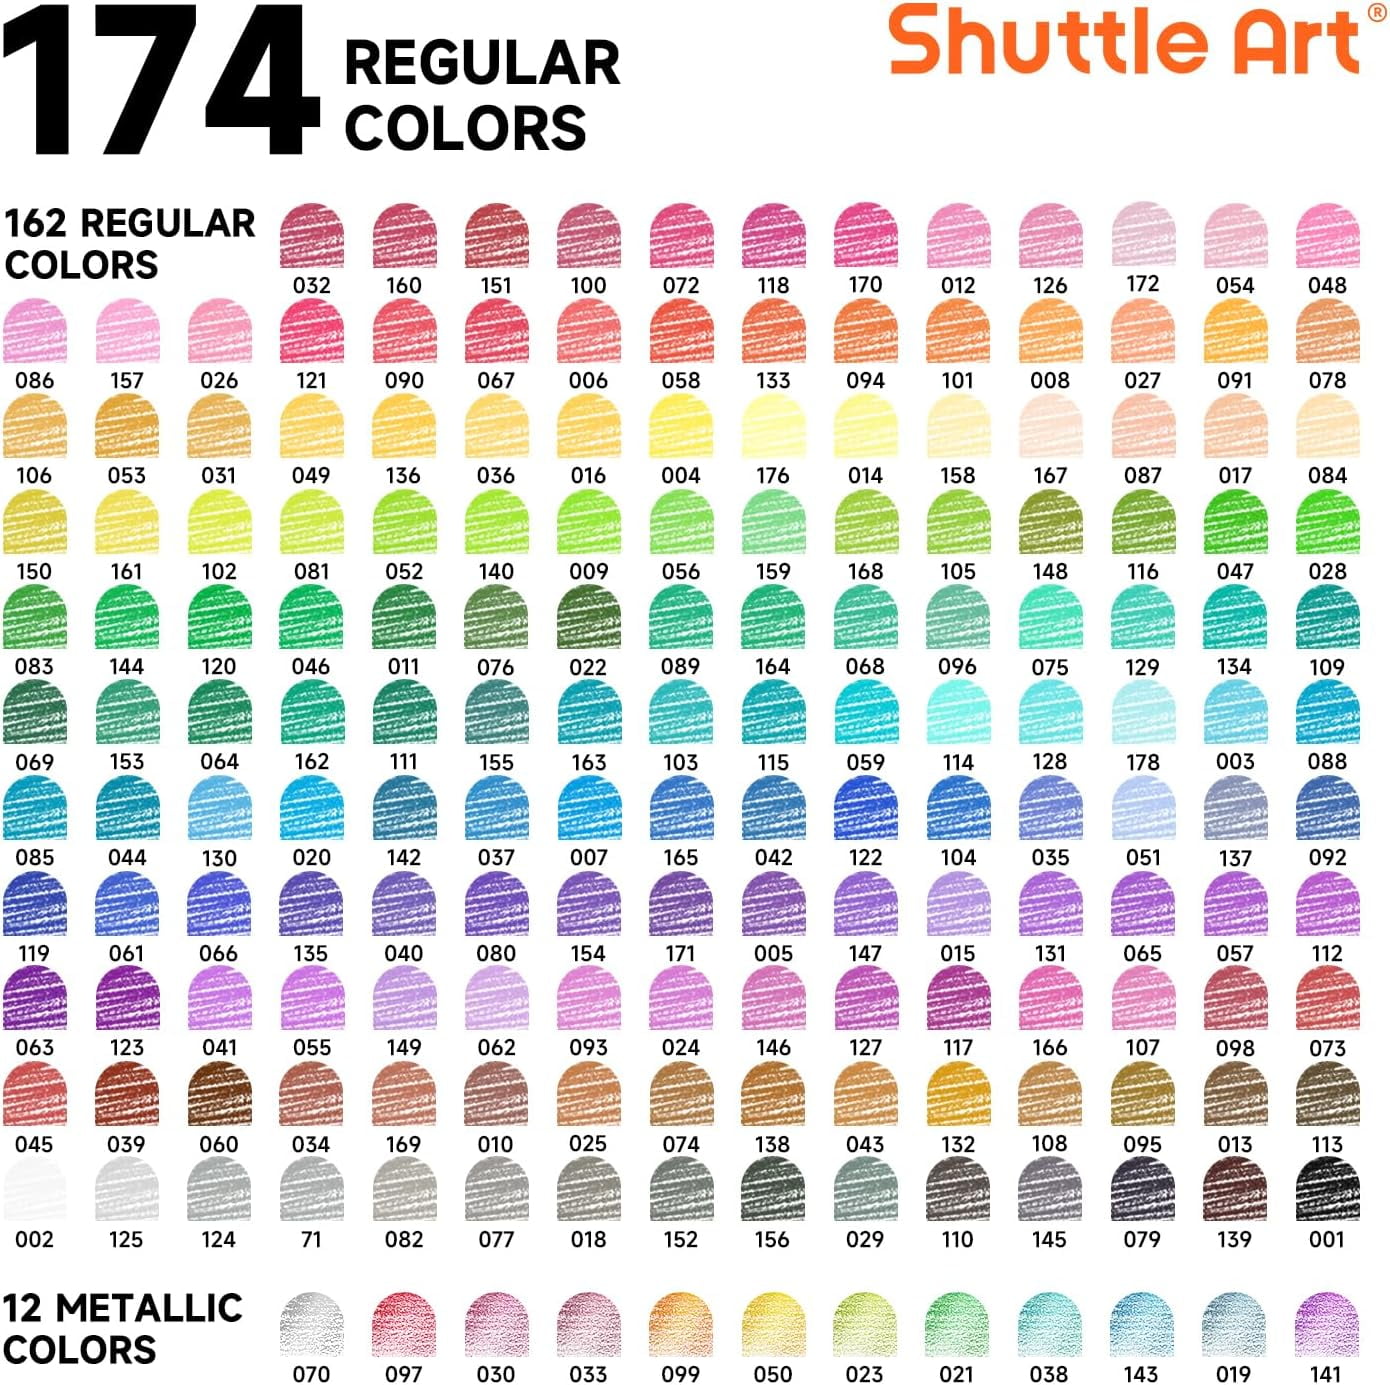 172 Colored Pencils, Shuttle Art Soft Core Color Pencil Set for Adult  Coloring Books Artist Drawing Sketching Crafting 